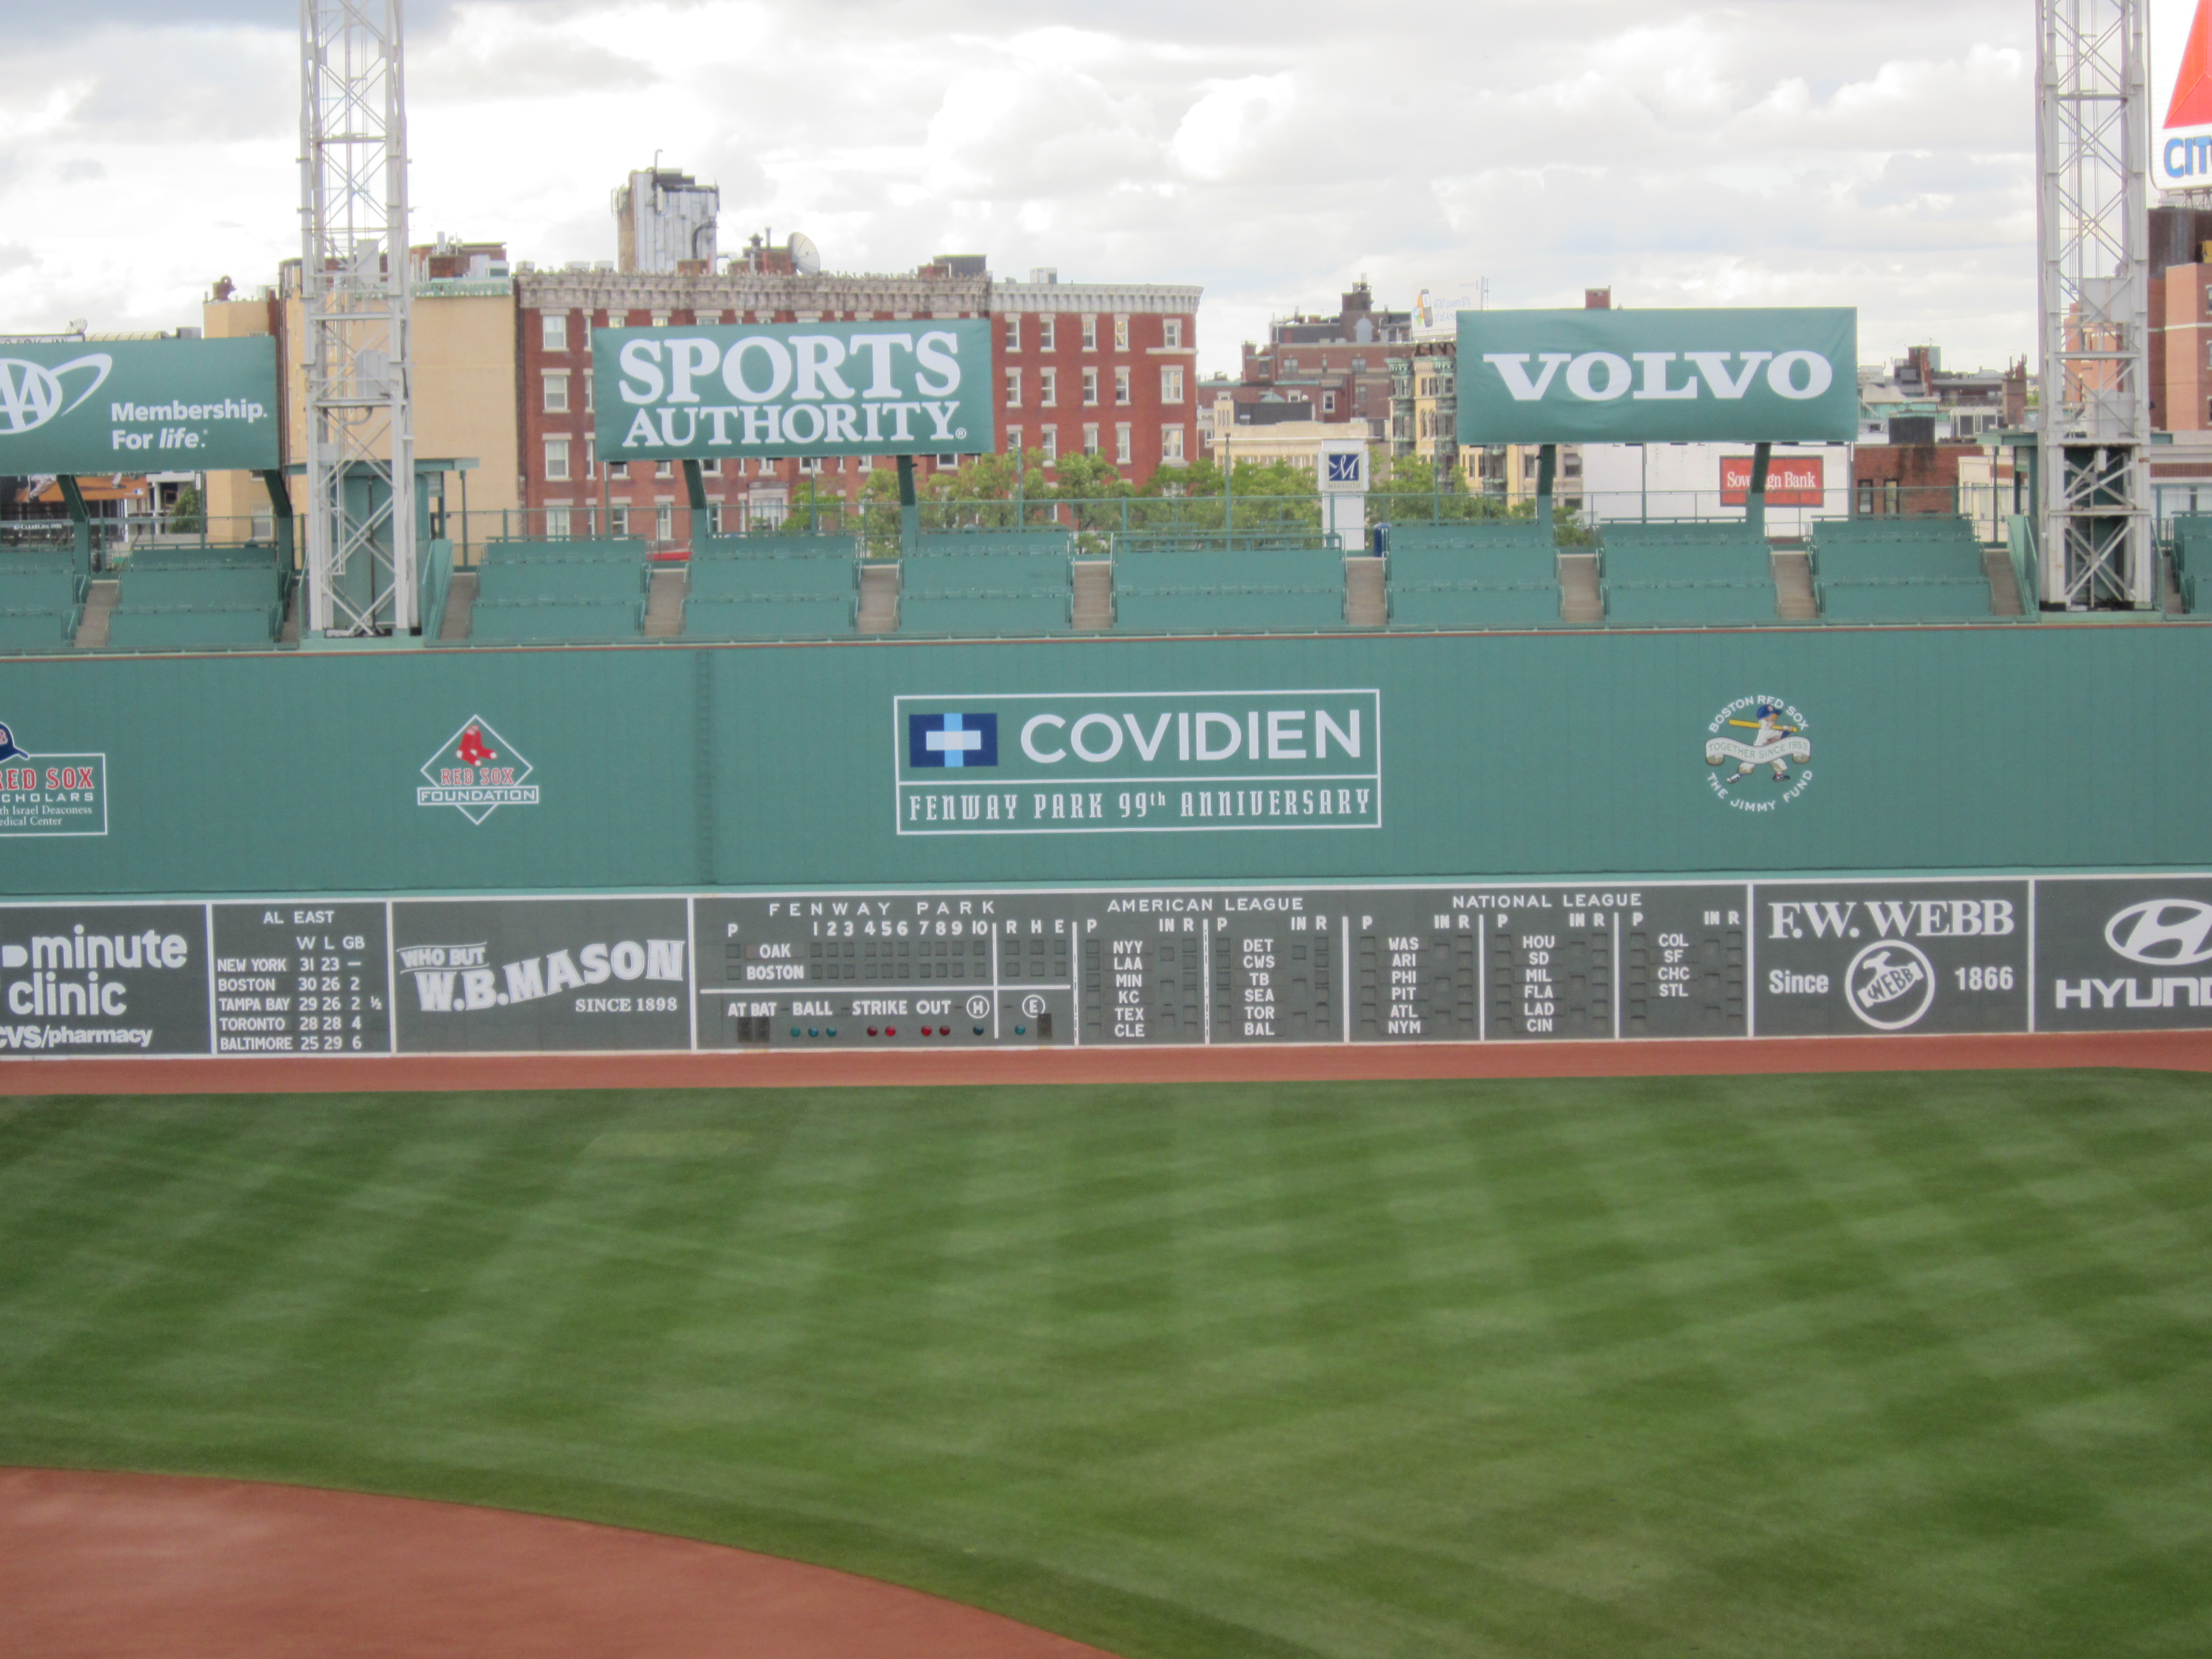 Fenway Park Home of Boston Red Sox Opened 110 Years Ago on April 20, 1912 -  Fastball